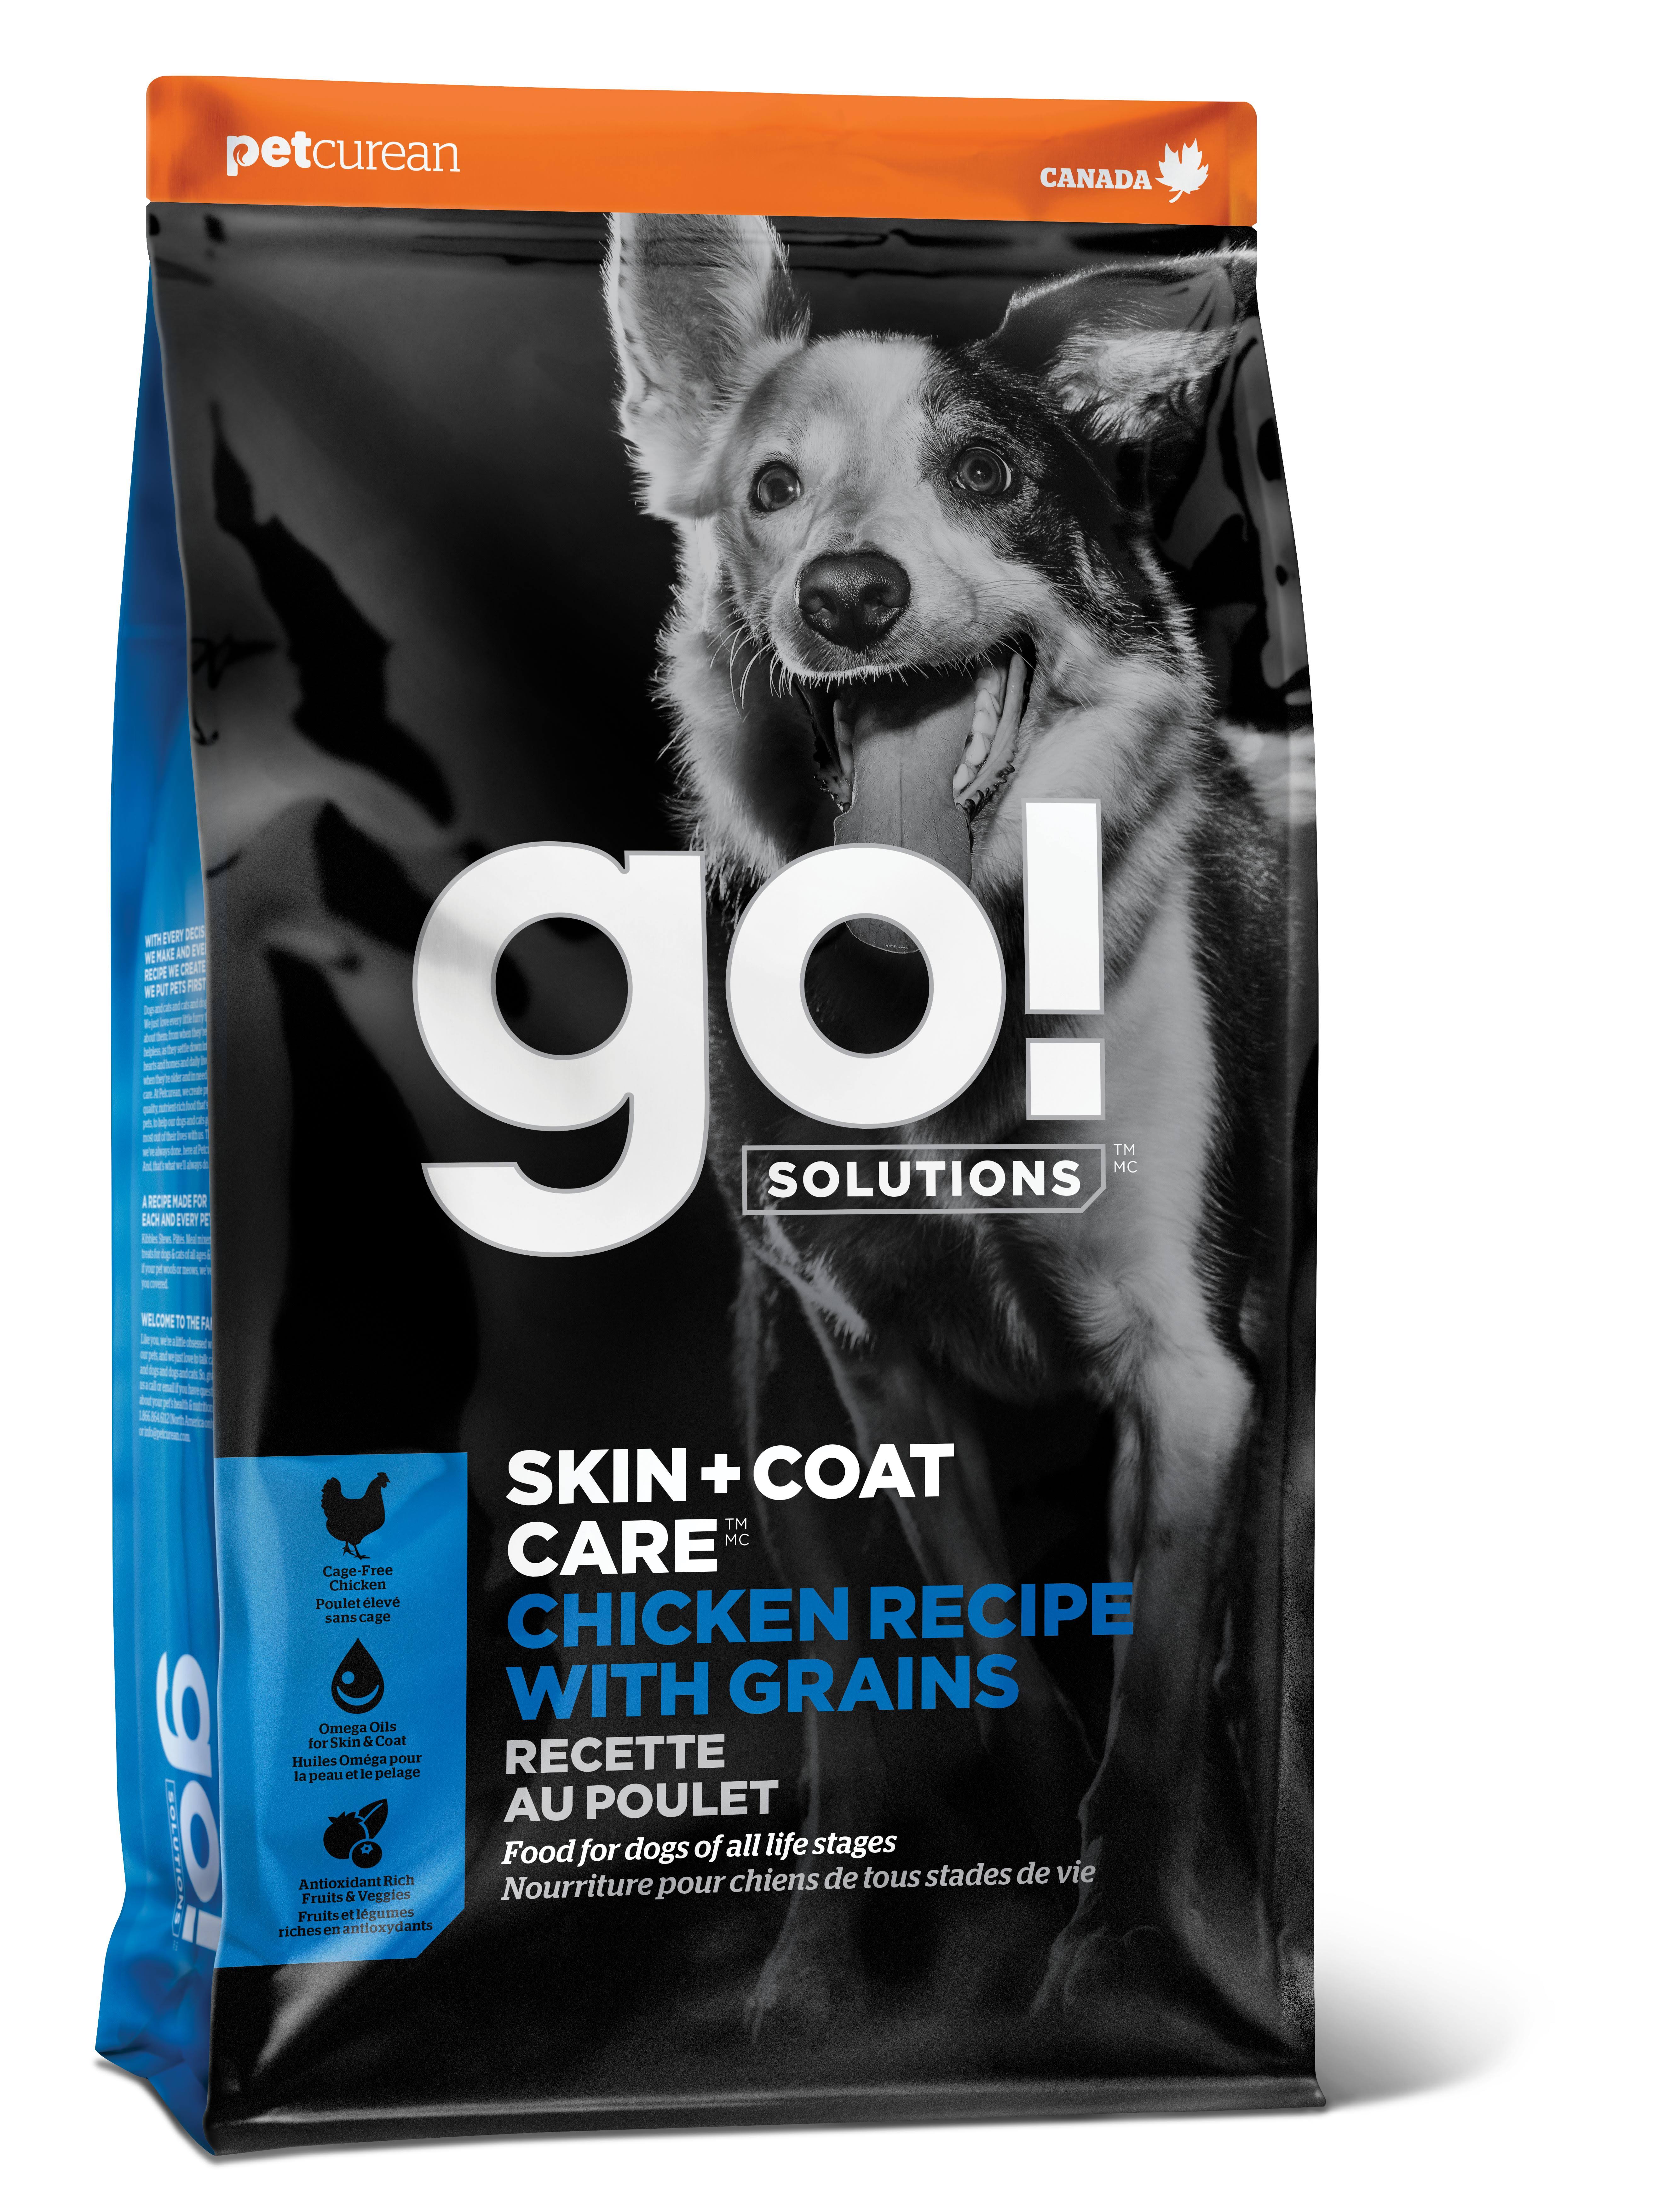 Go! Solutions Skin + Coat Care Chicken Dog Food 12lbs